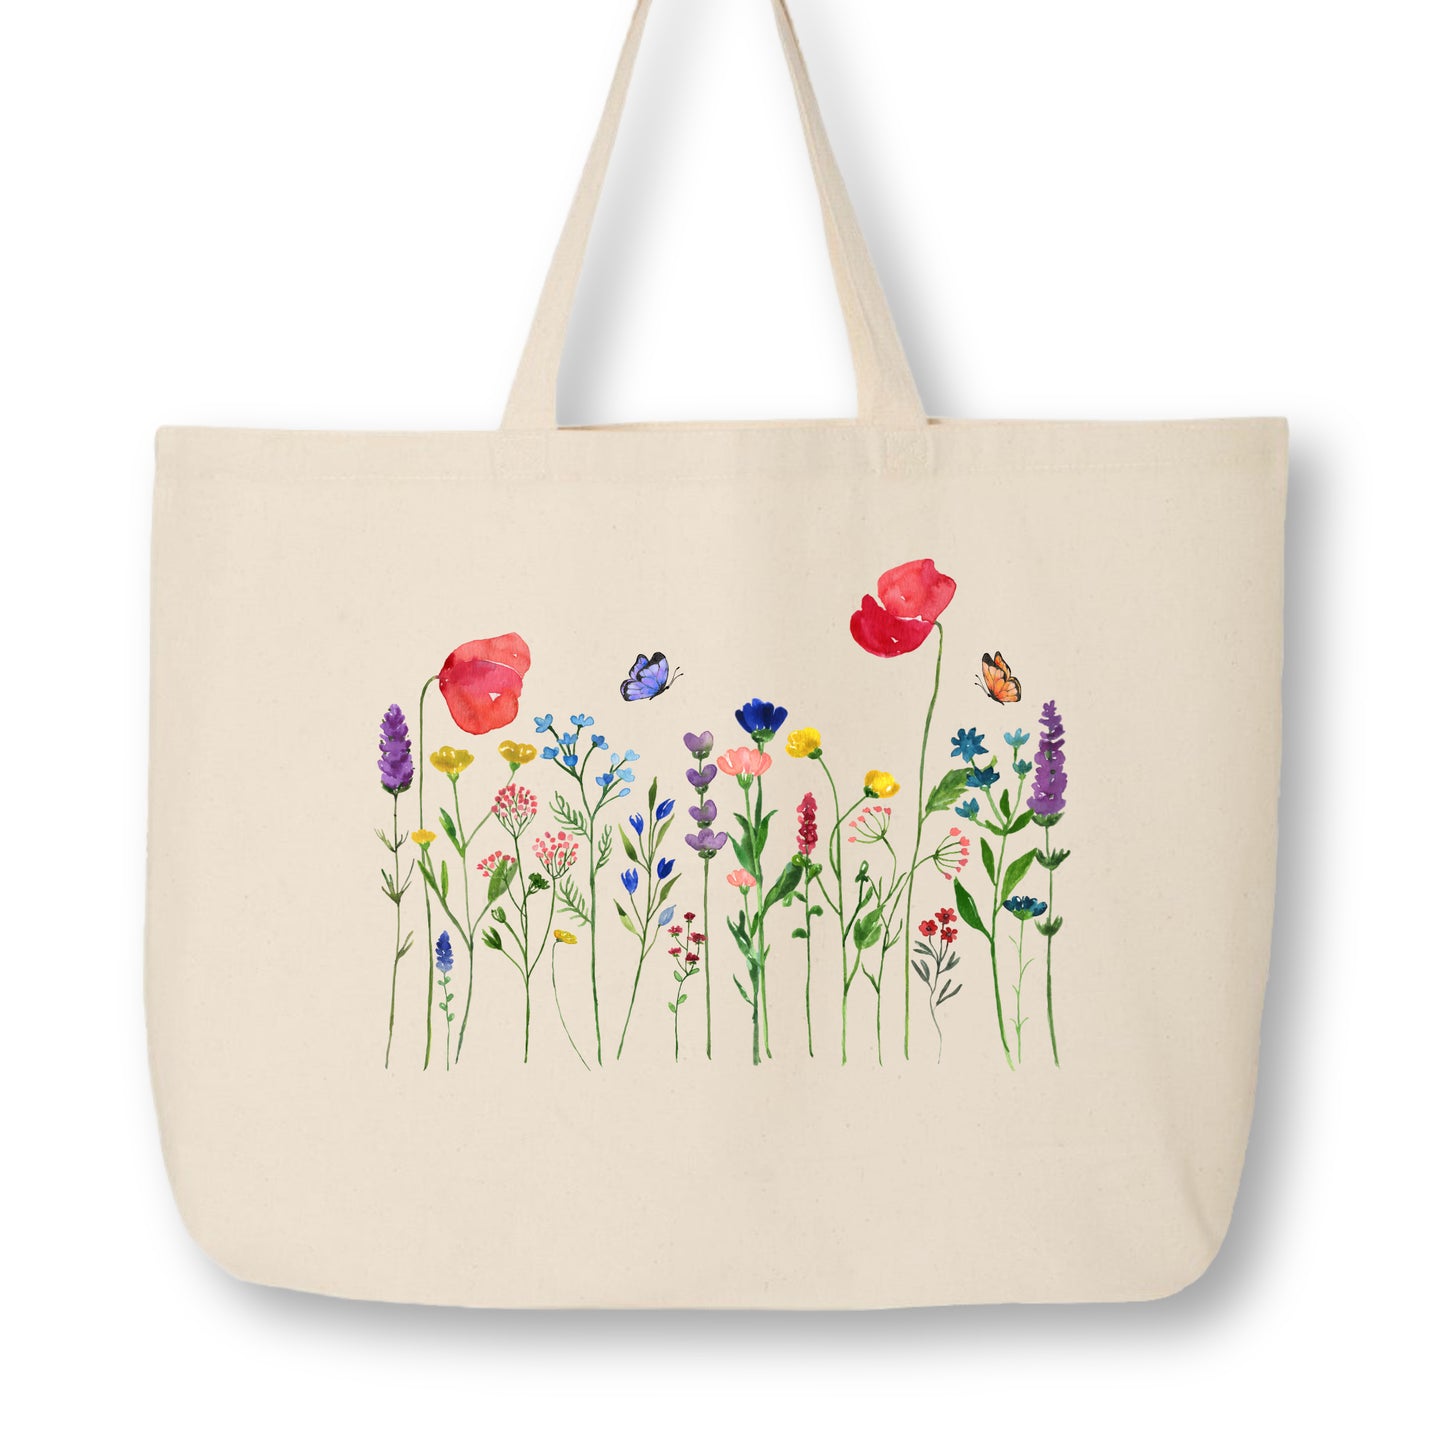 Floral Tote Bag, Flower, Wildflower, Aesthetic, Cute, Canvas Tote Bag with Zipper, Large Canvas Bag